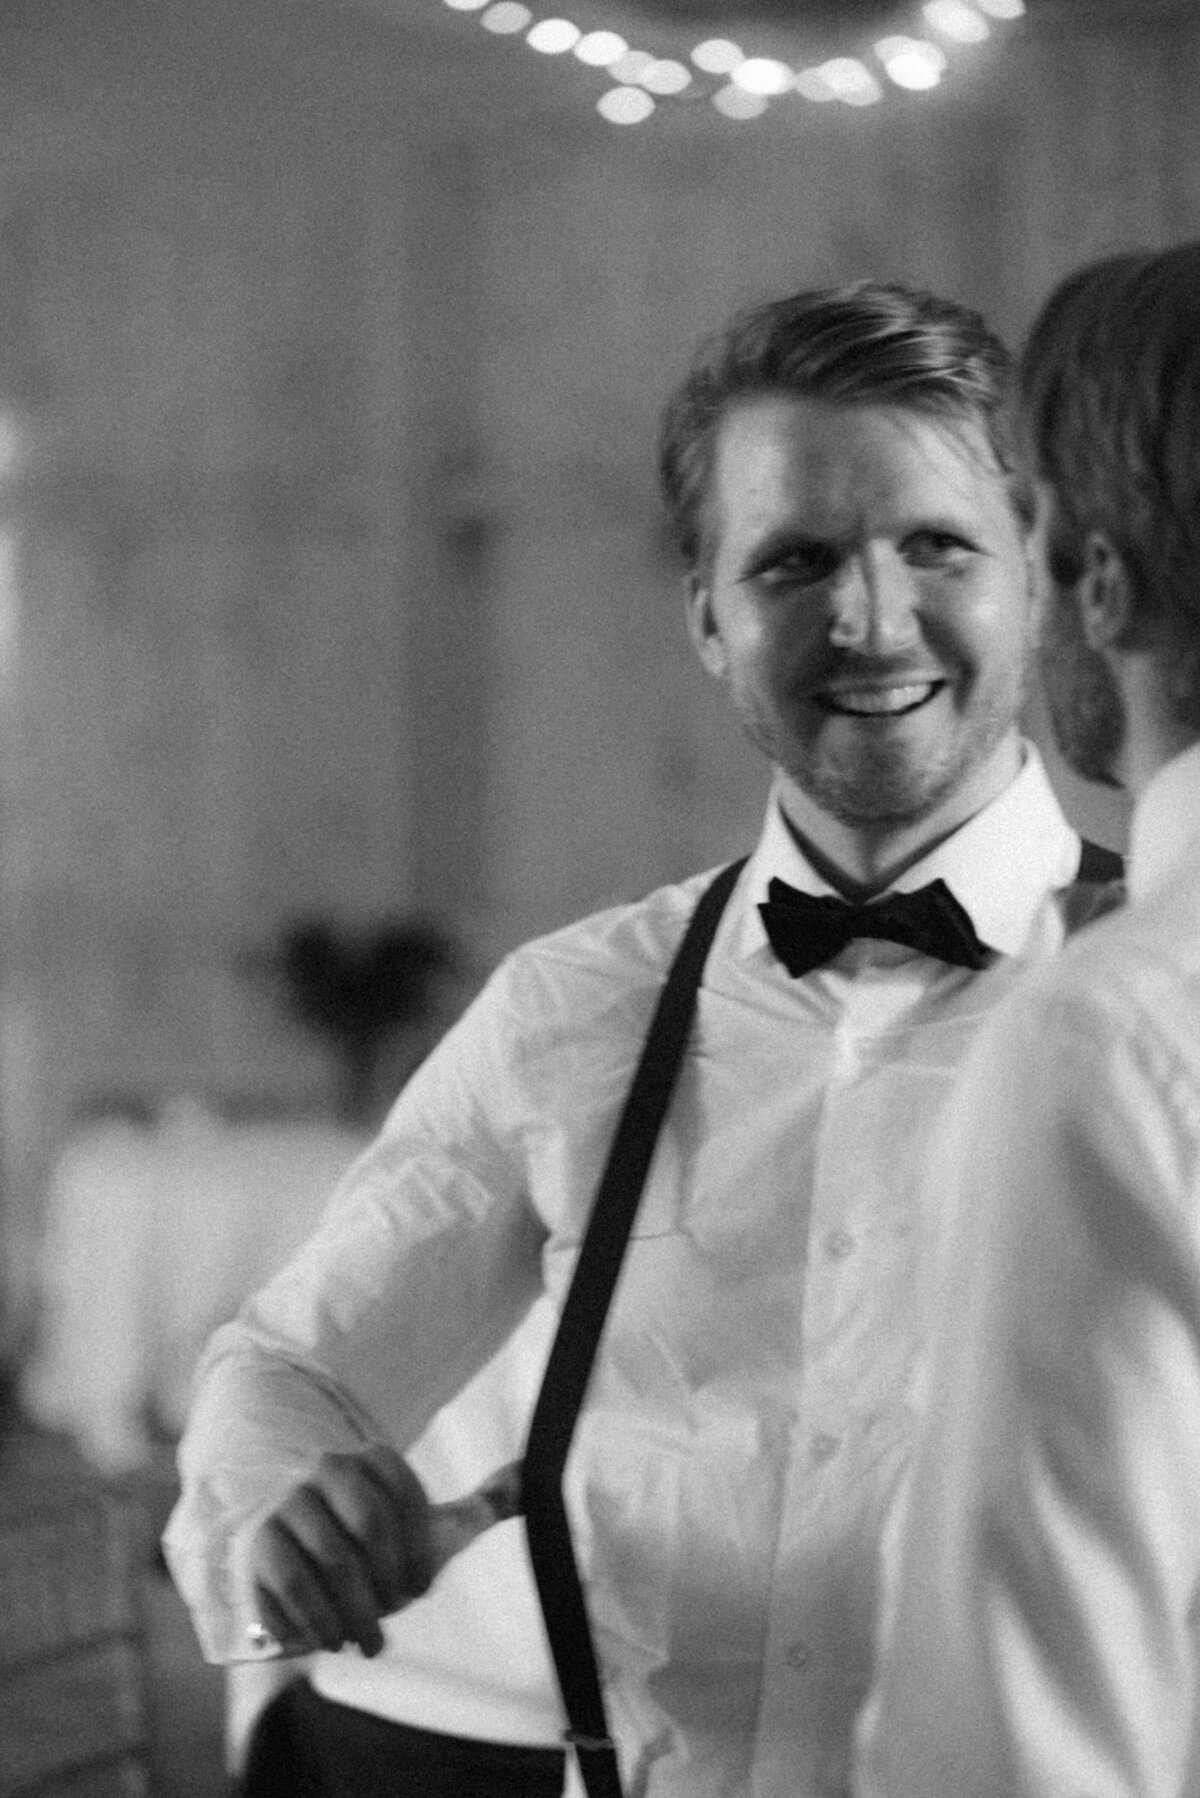 The groom laughing in an image captured by wedding photographer Hannika Gabrielsson.